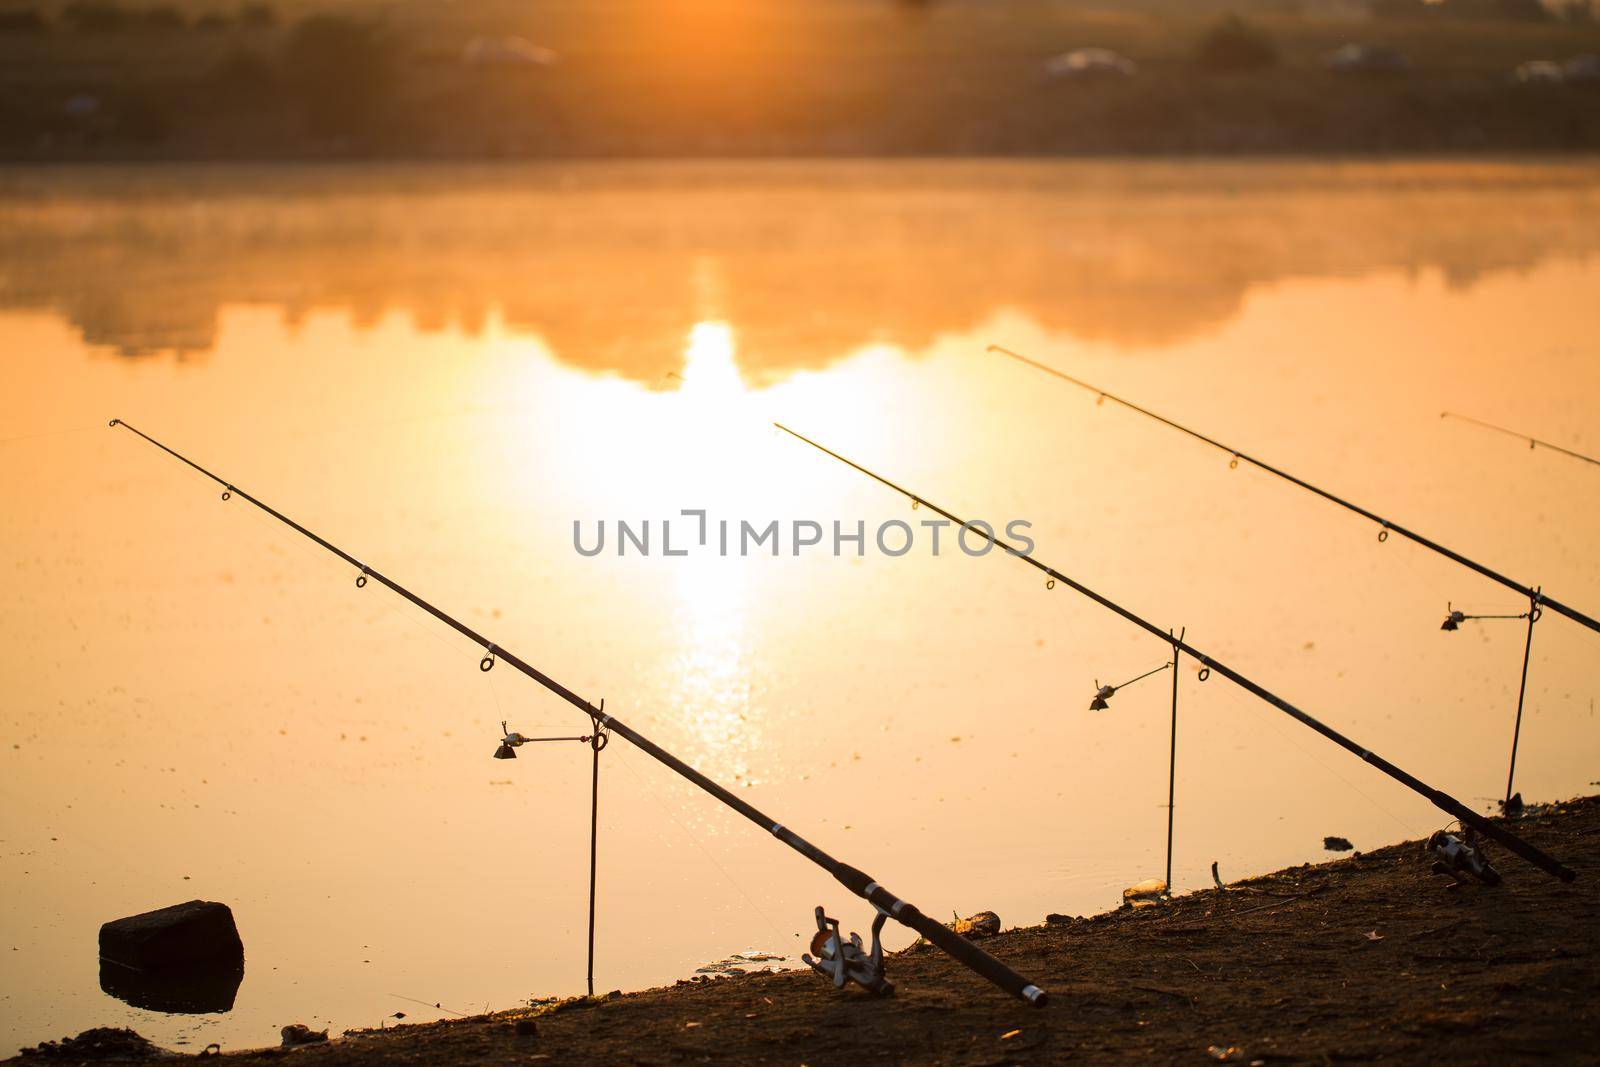 Freshwater fishing with fishing rods on the shore of the pond, lake. by StudioPeace